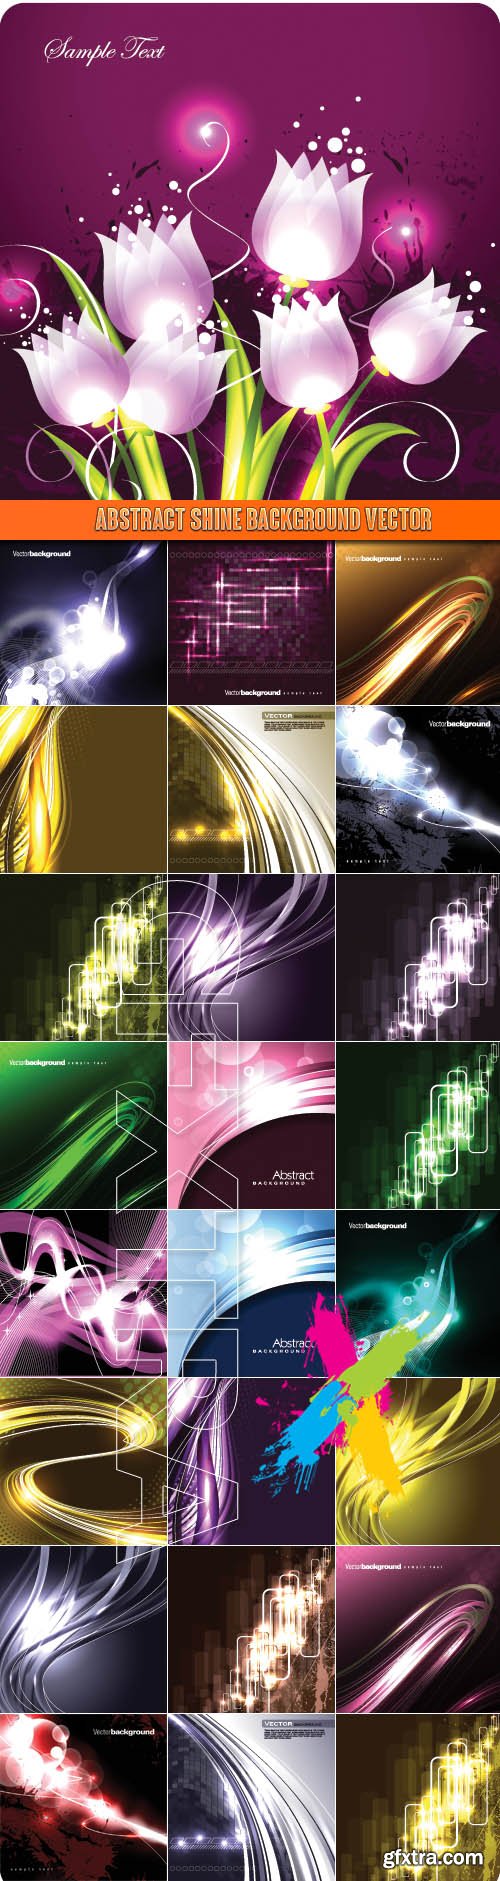 Abstract shine background vector